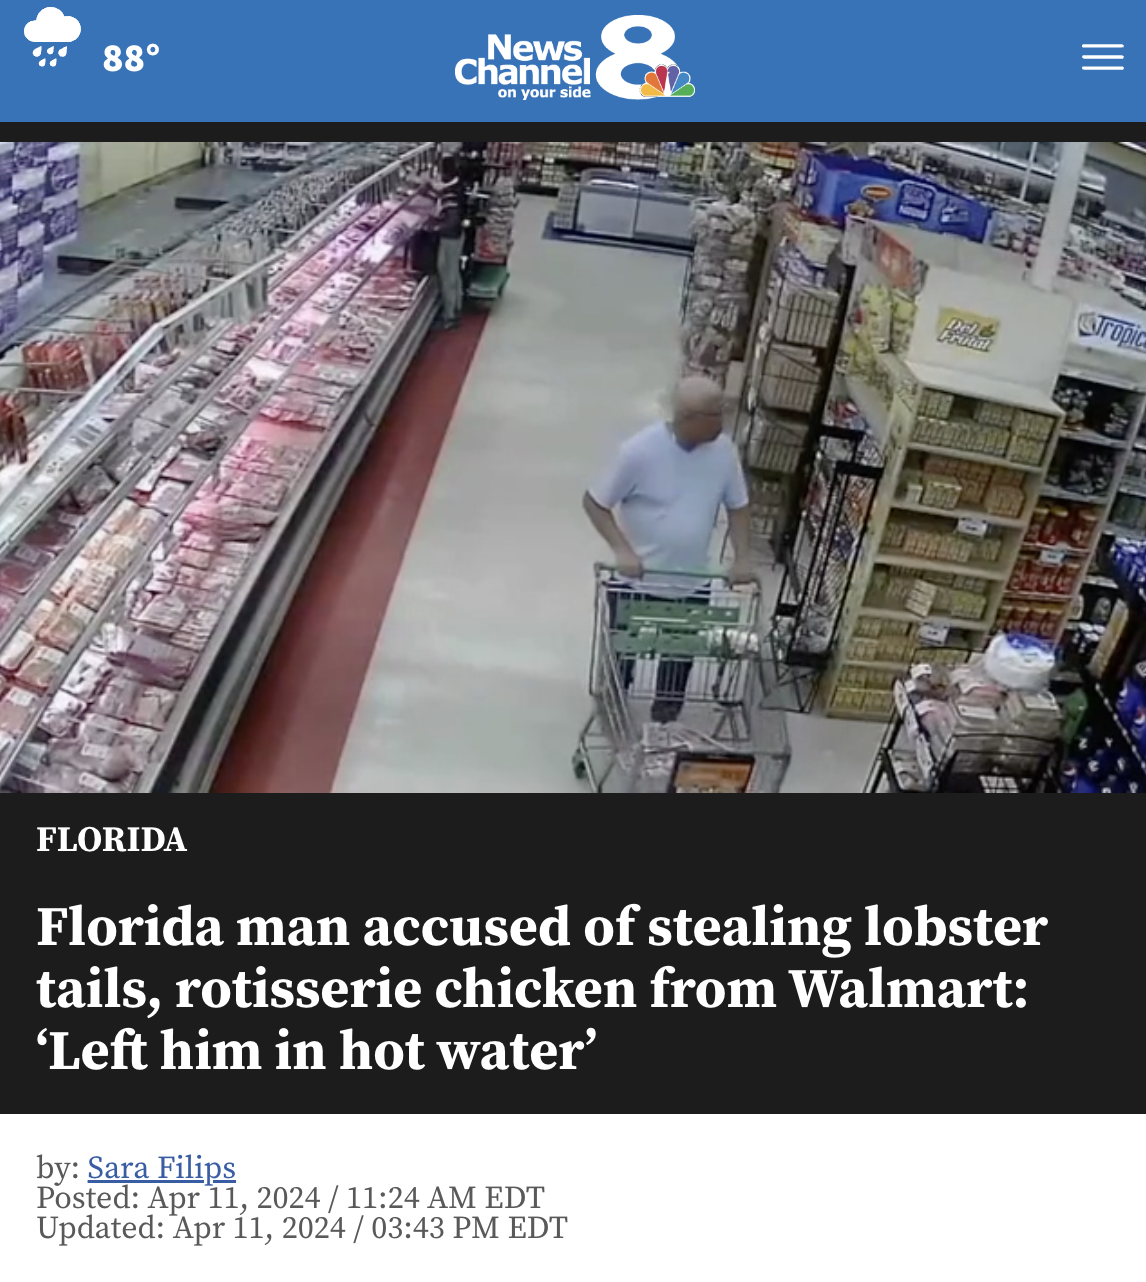 screenshot - 88 News, Channel on your side Florida Florida man accused of stealing lobster tails, rotisserie chicken from Walmart 'Left him in hot water' by Sara Filips Posted Edt Updated Edt